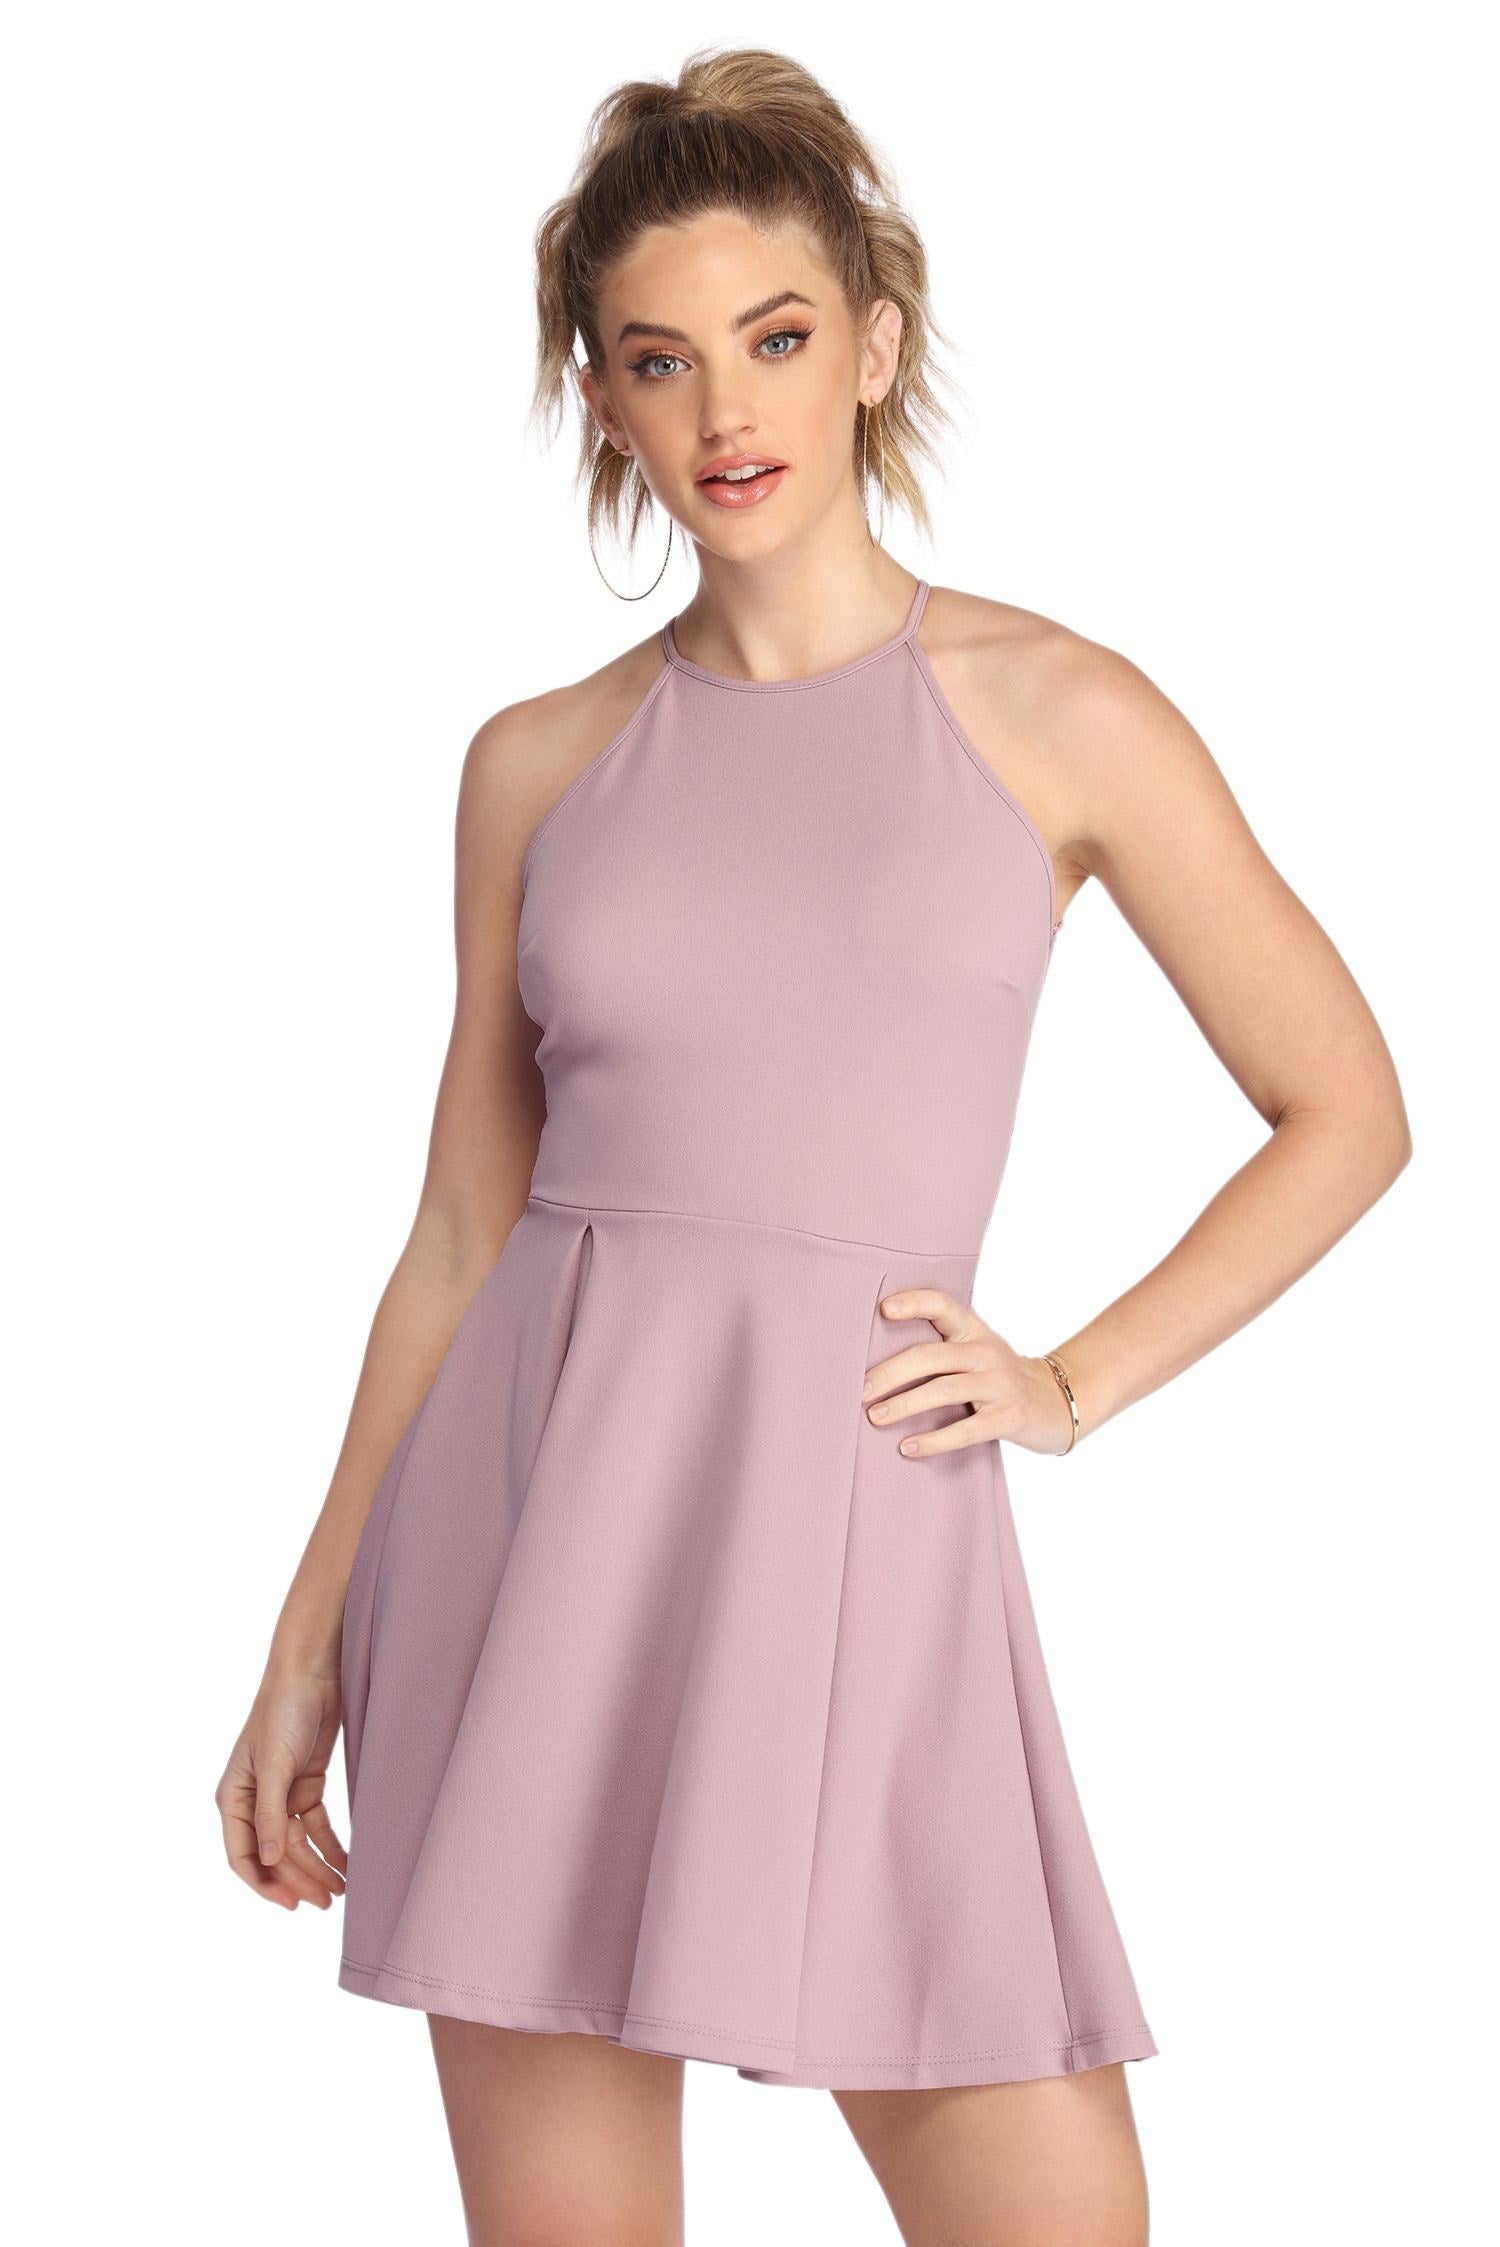 Memorable Moments Skater Dress - Lady Occasions